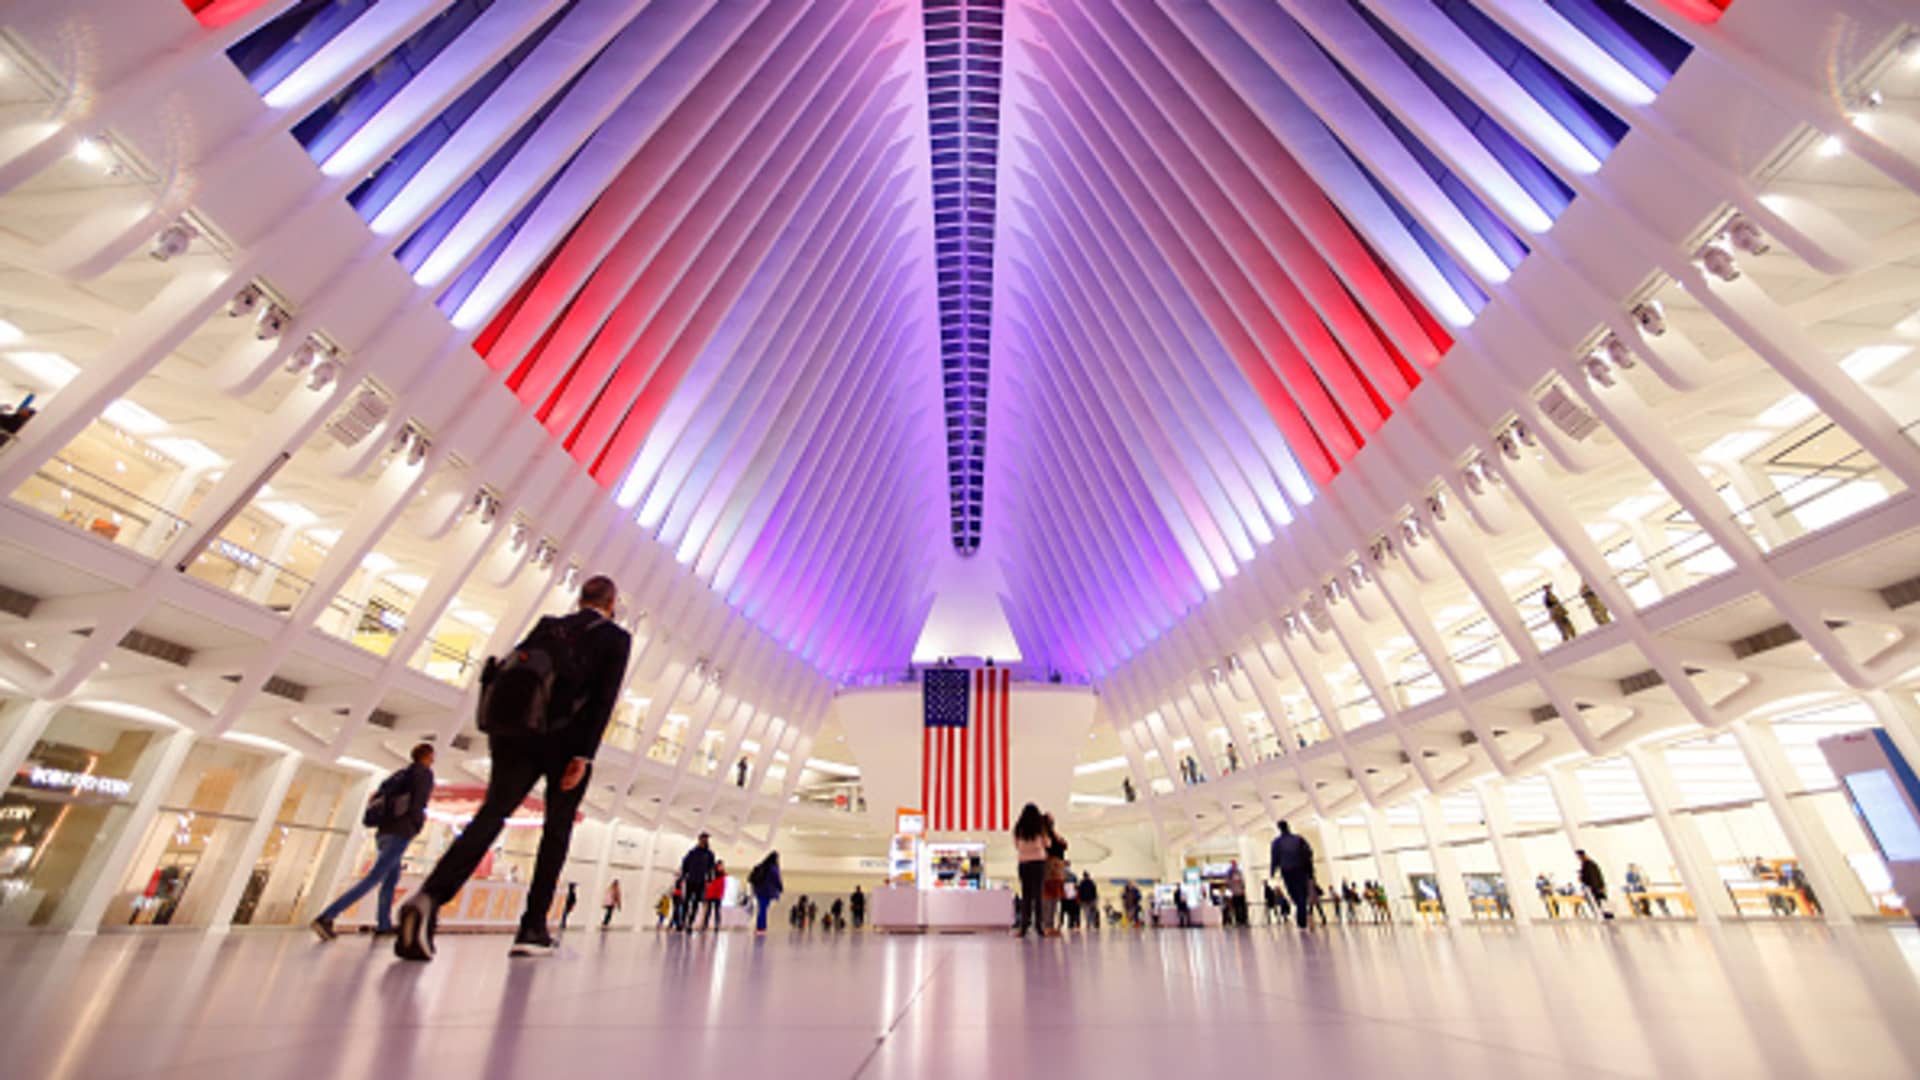 The Oculus transit hub at One World Trade Center turns on its new LED lights in red, white and blue in honor of Veterans Day on November 10, 2020 in New York City.